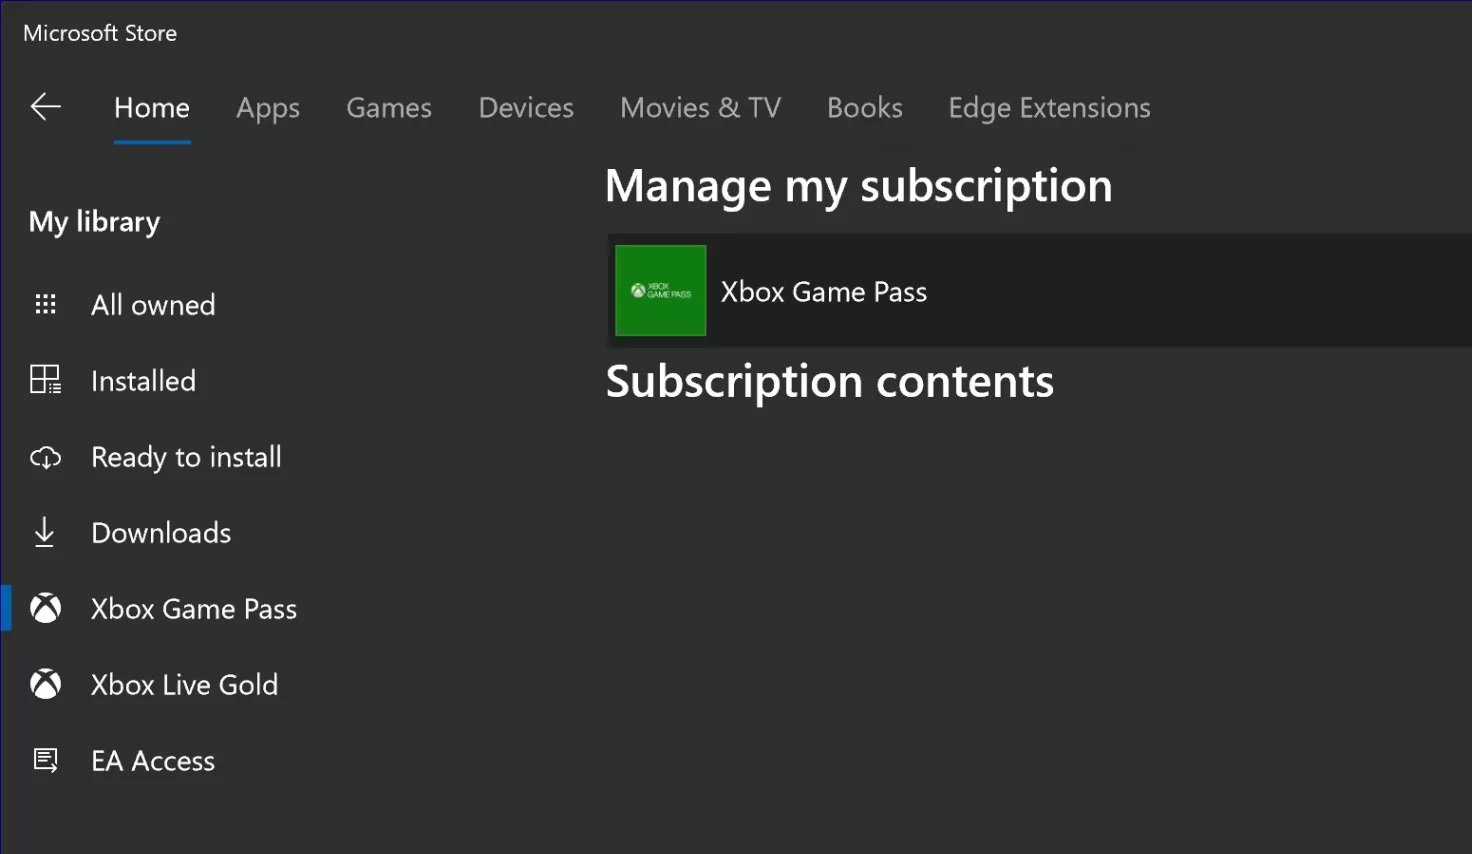 Microsoft Store for Windows 10 is getting subscription and Timeline features Microsoft-Store-subscriptions-feature.jpg